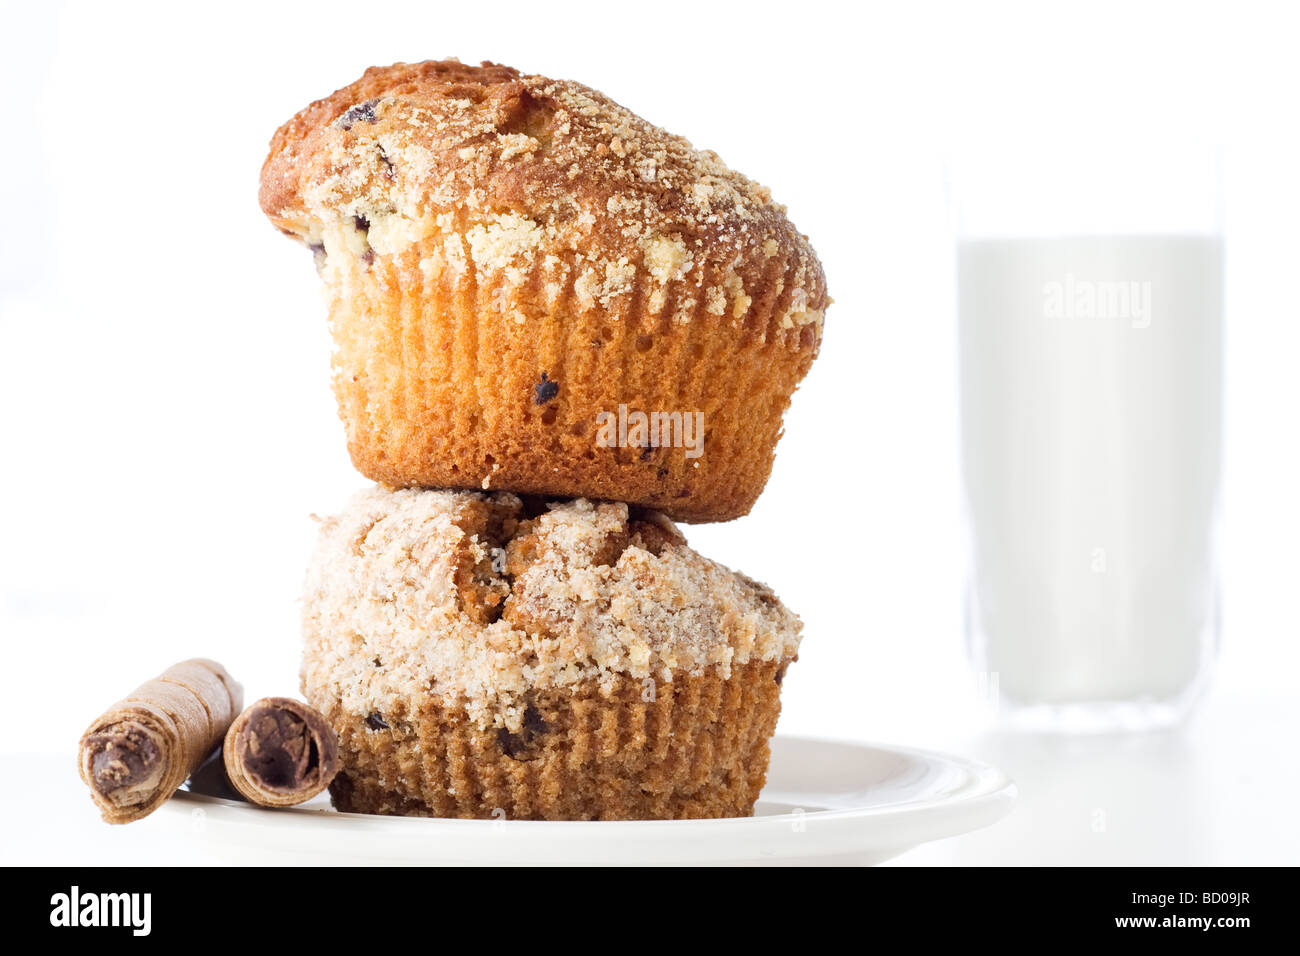 Two muffins one over another in white plate with a glass of milk in the background Stock Photo